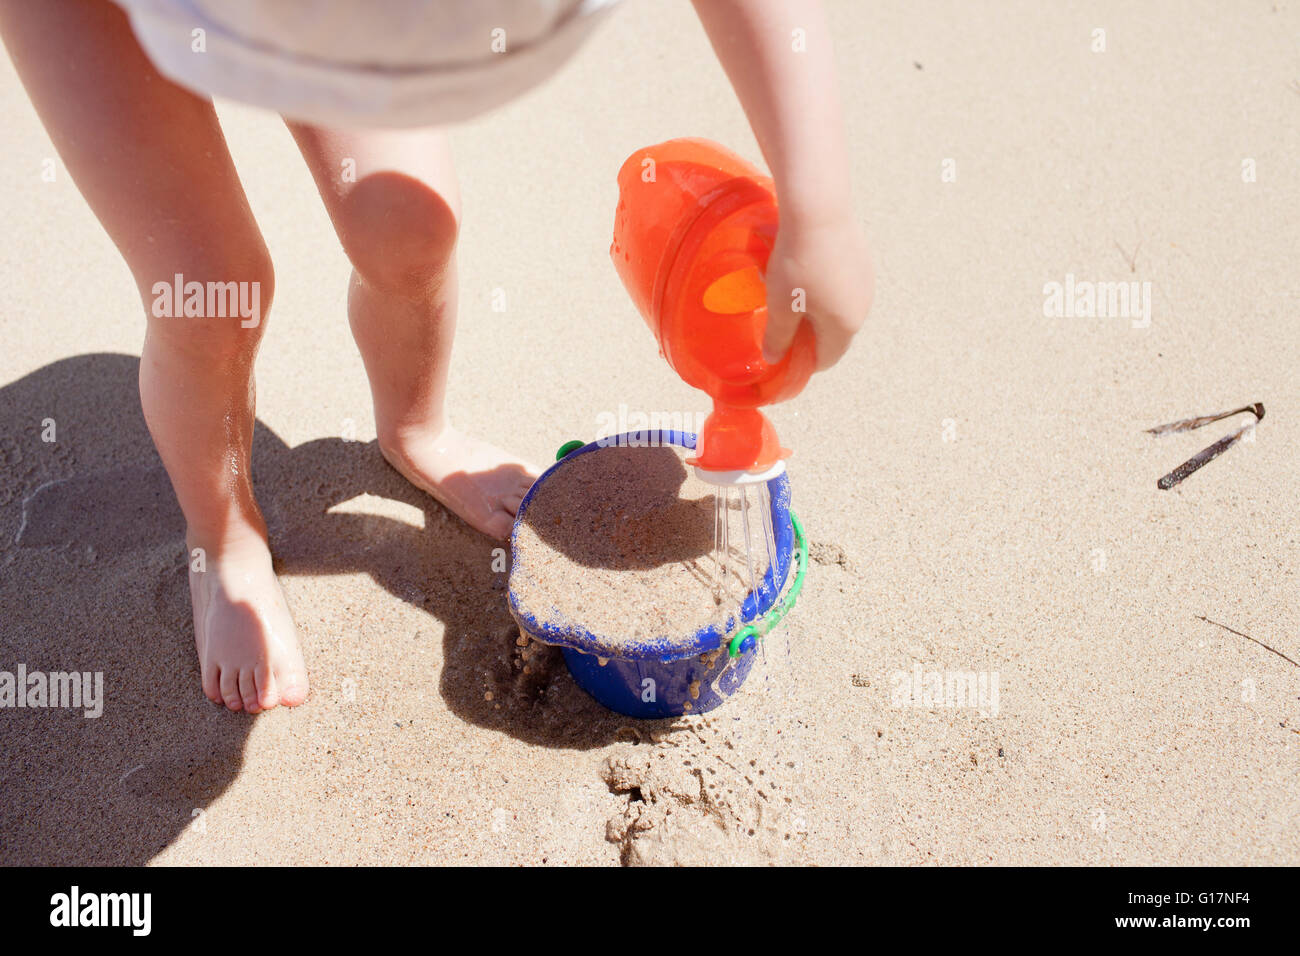 Baby girl pouring water on bucket of sand, elevated view Stock Photo